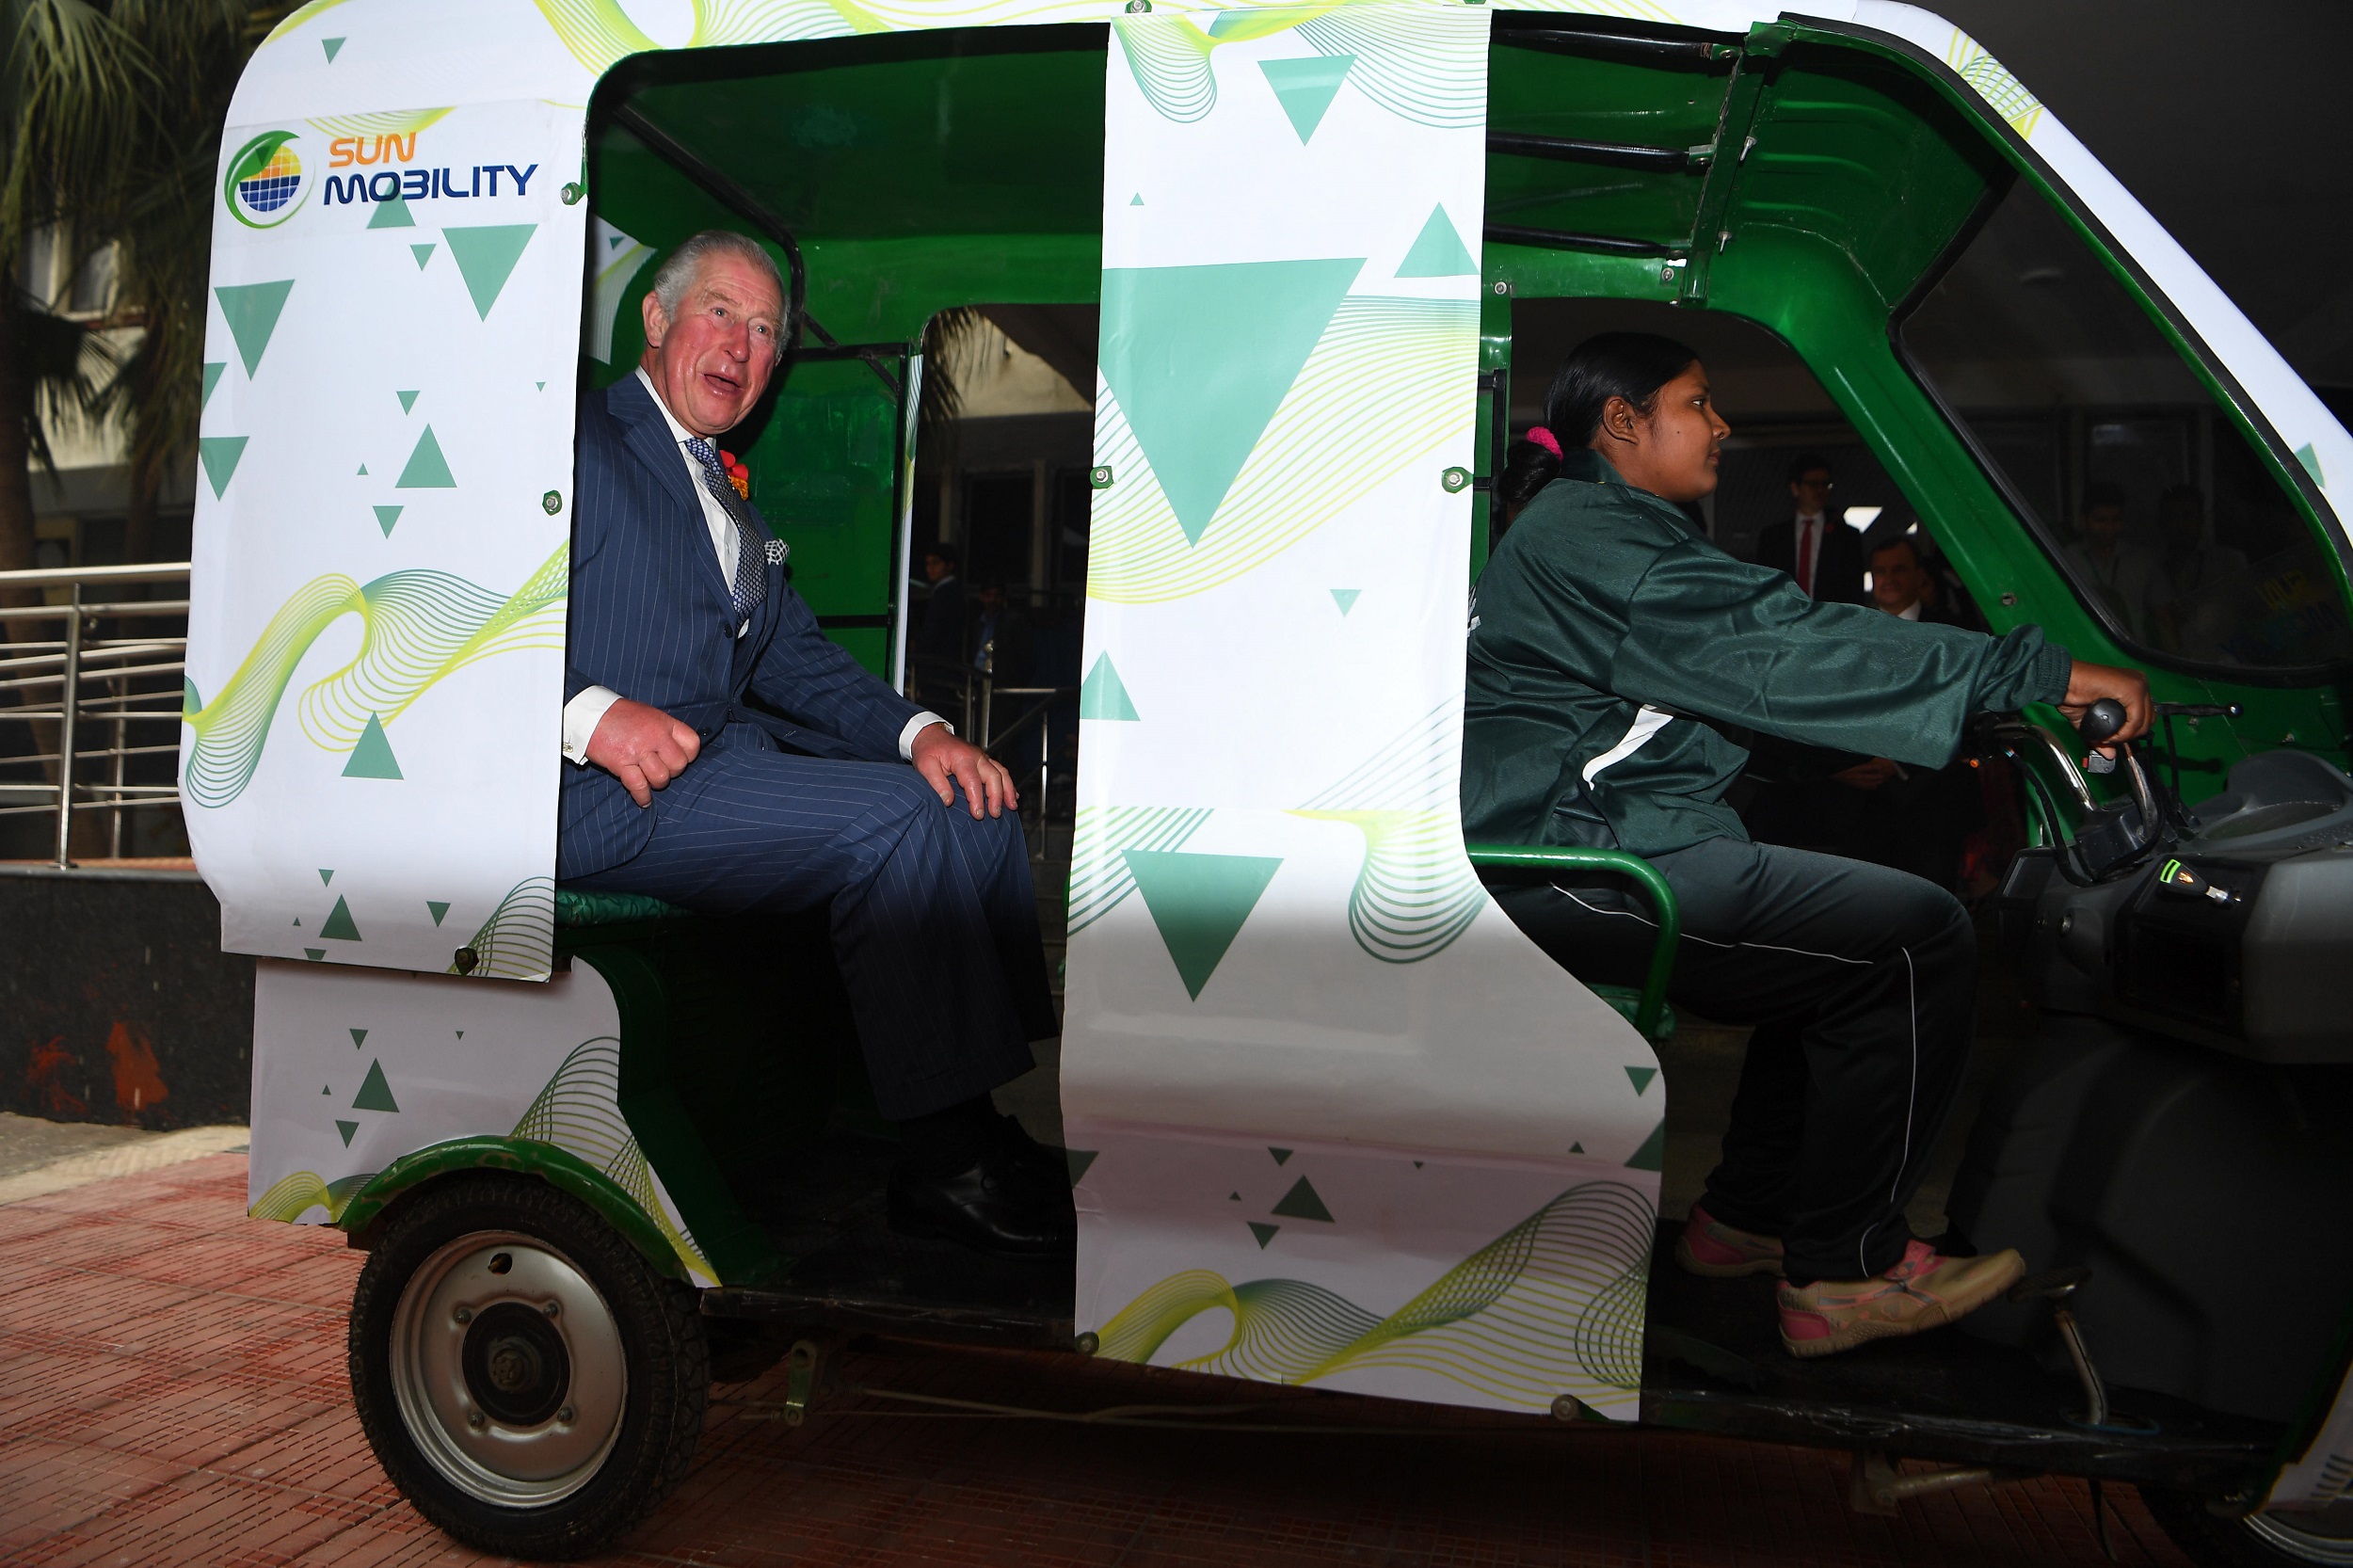 The Prince of Wales is given a demonstration of an e-rickshaw driven by Maria as he visits the Indian MET office in New Delhi [image: PA Images / Alamy]